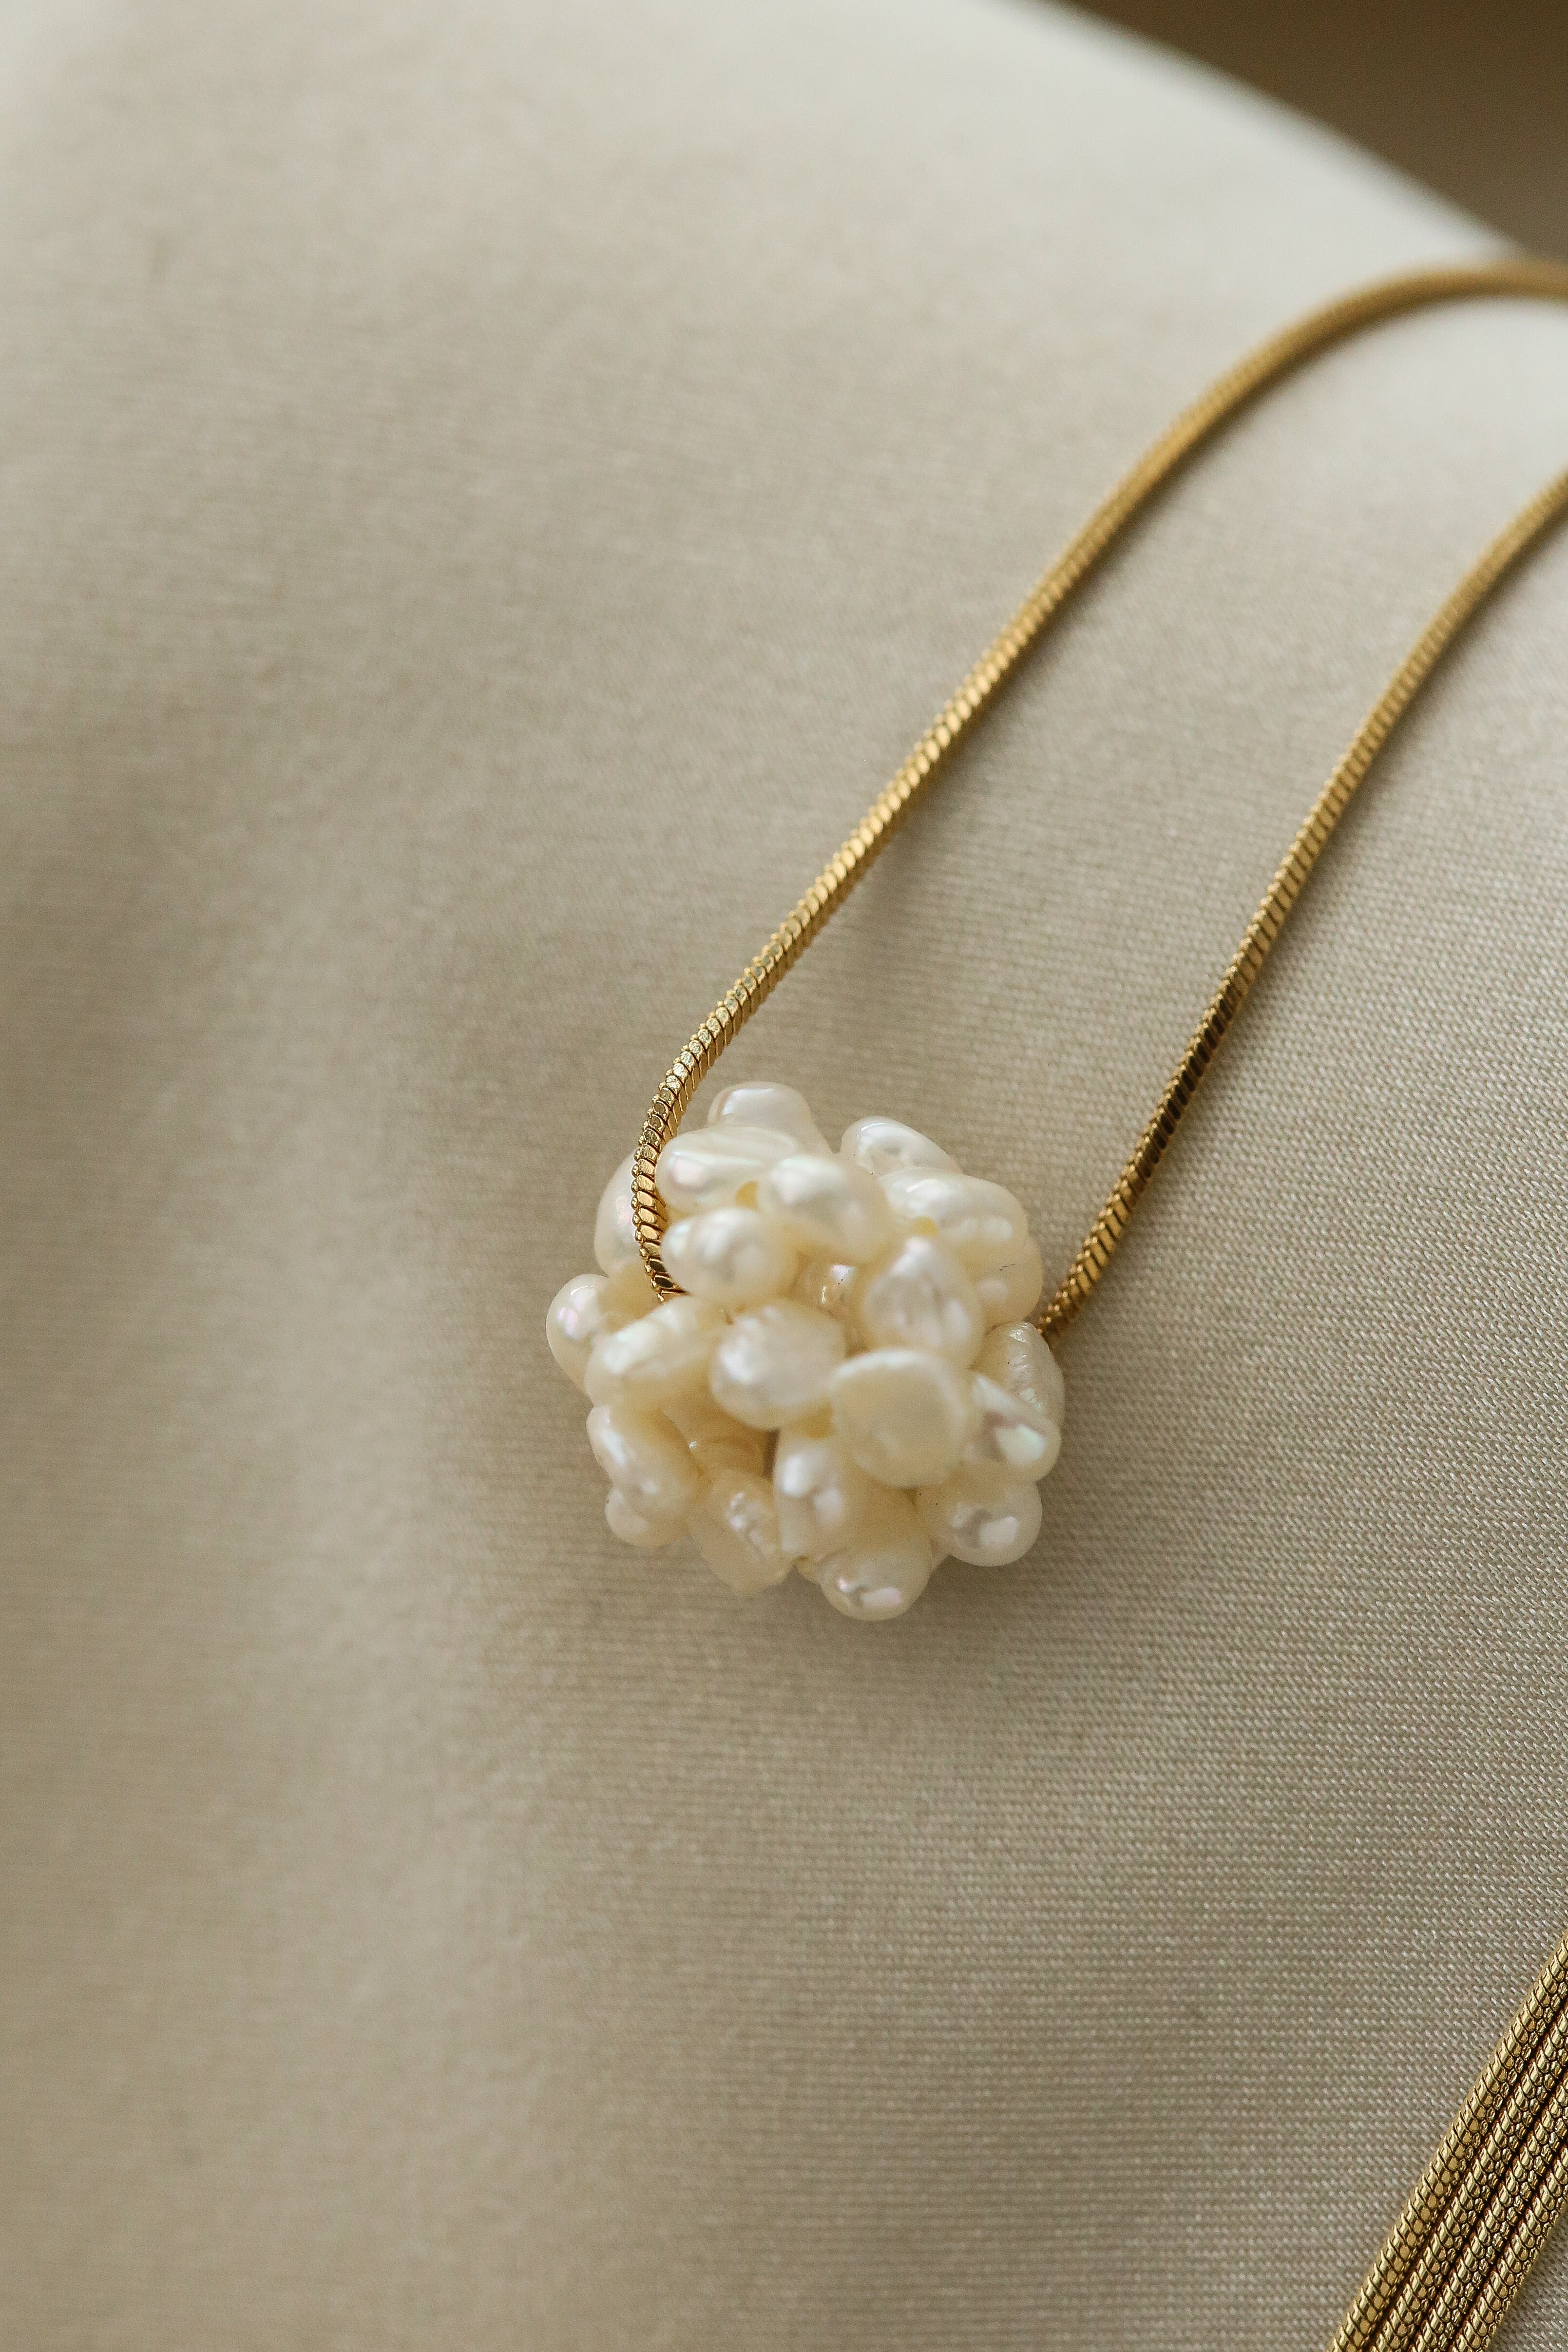 Willow Necklace - Boutique Minimaliste has waterproof, durable, elegant and vintage inspired jewelry